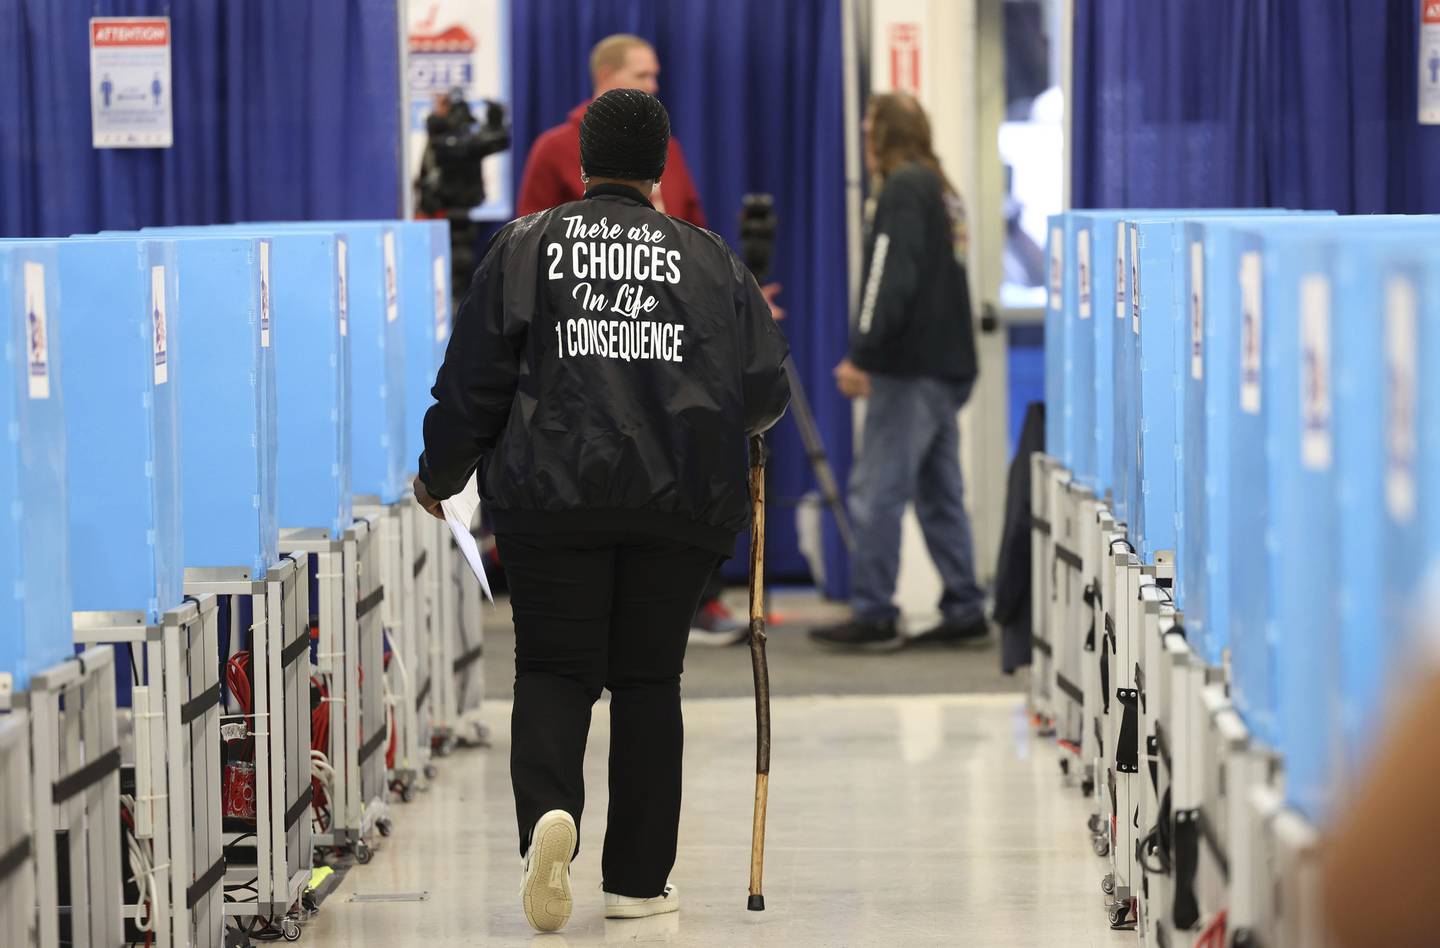 People leave after voting on the first day of early voting at the Chicago Board of Elections Super Site on Oct. 7, 2022.  